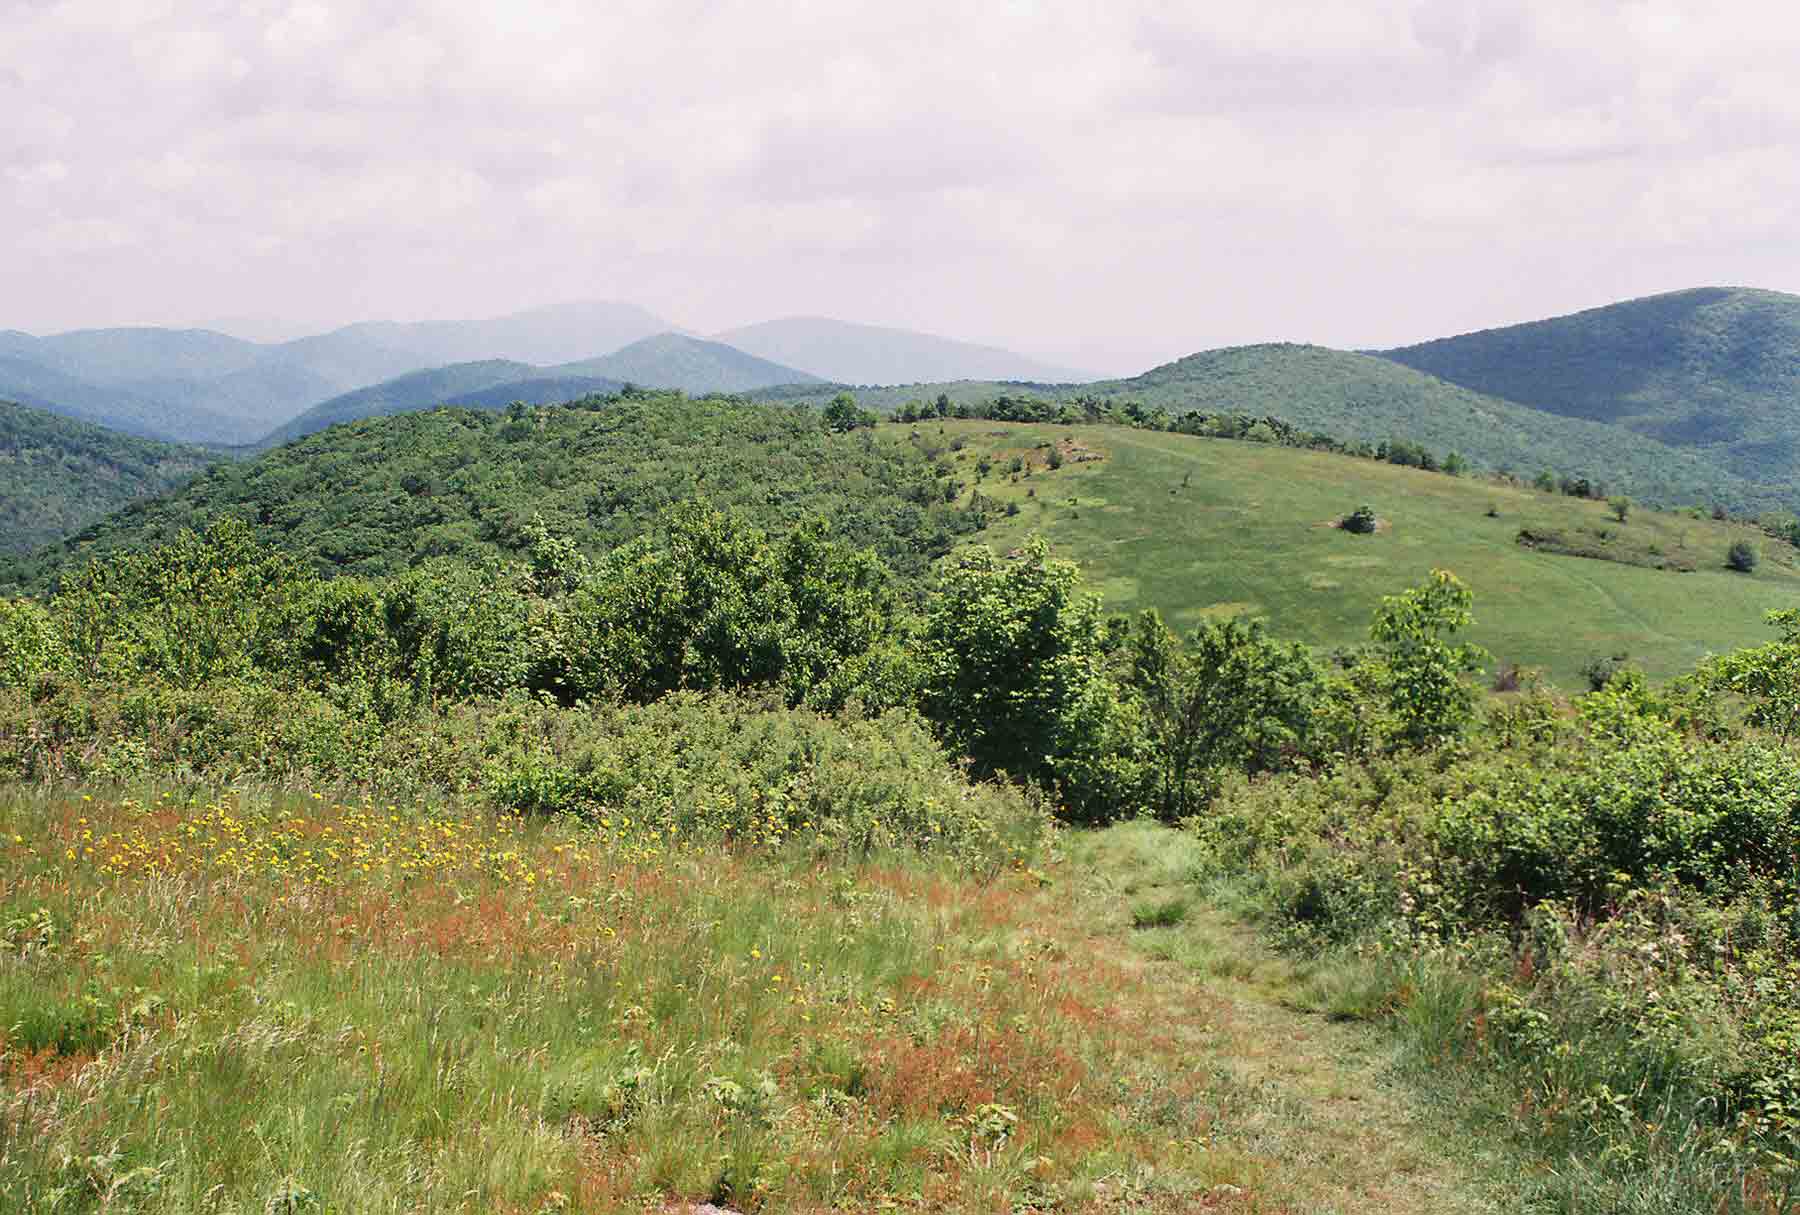 mm 3.5 - View north along crest of Cold Mt. (May 2004).  Courtesy dlcul@conncoll.edu